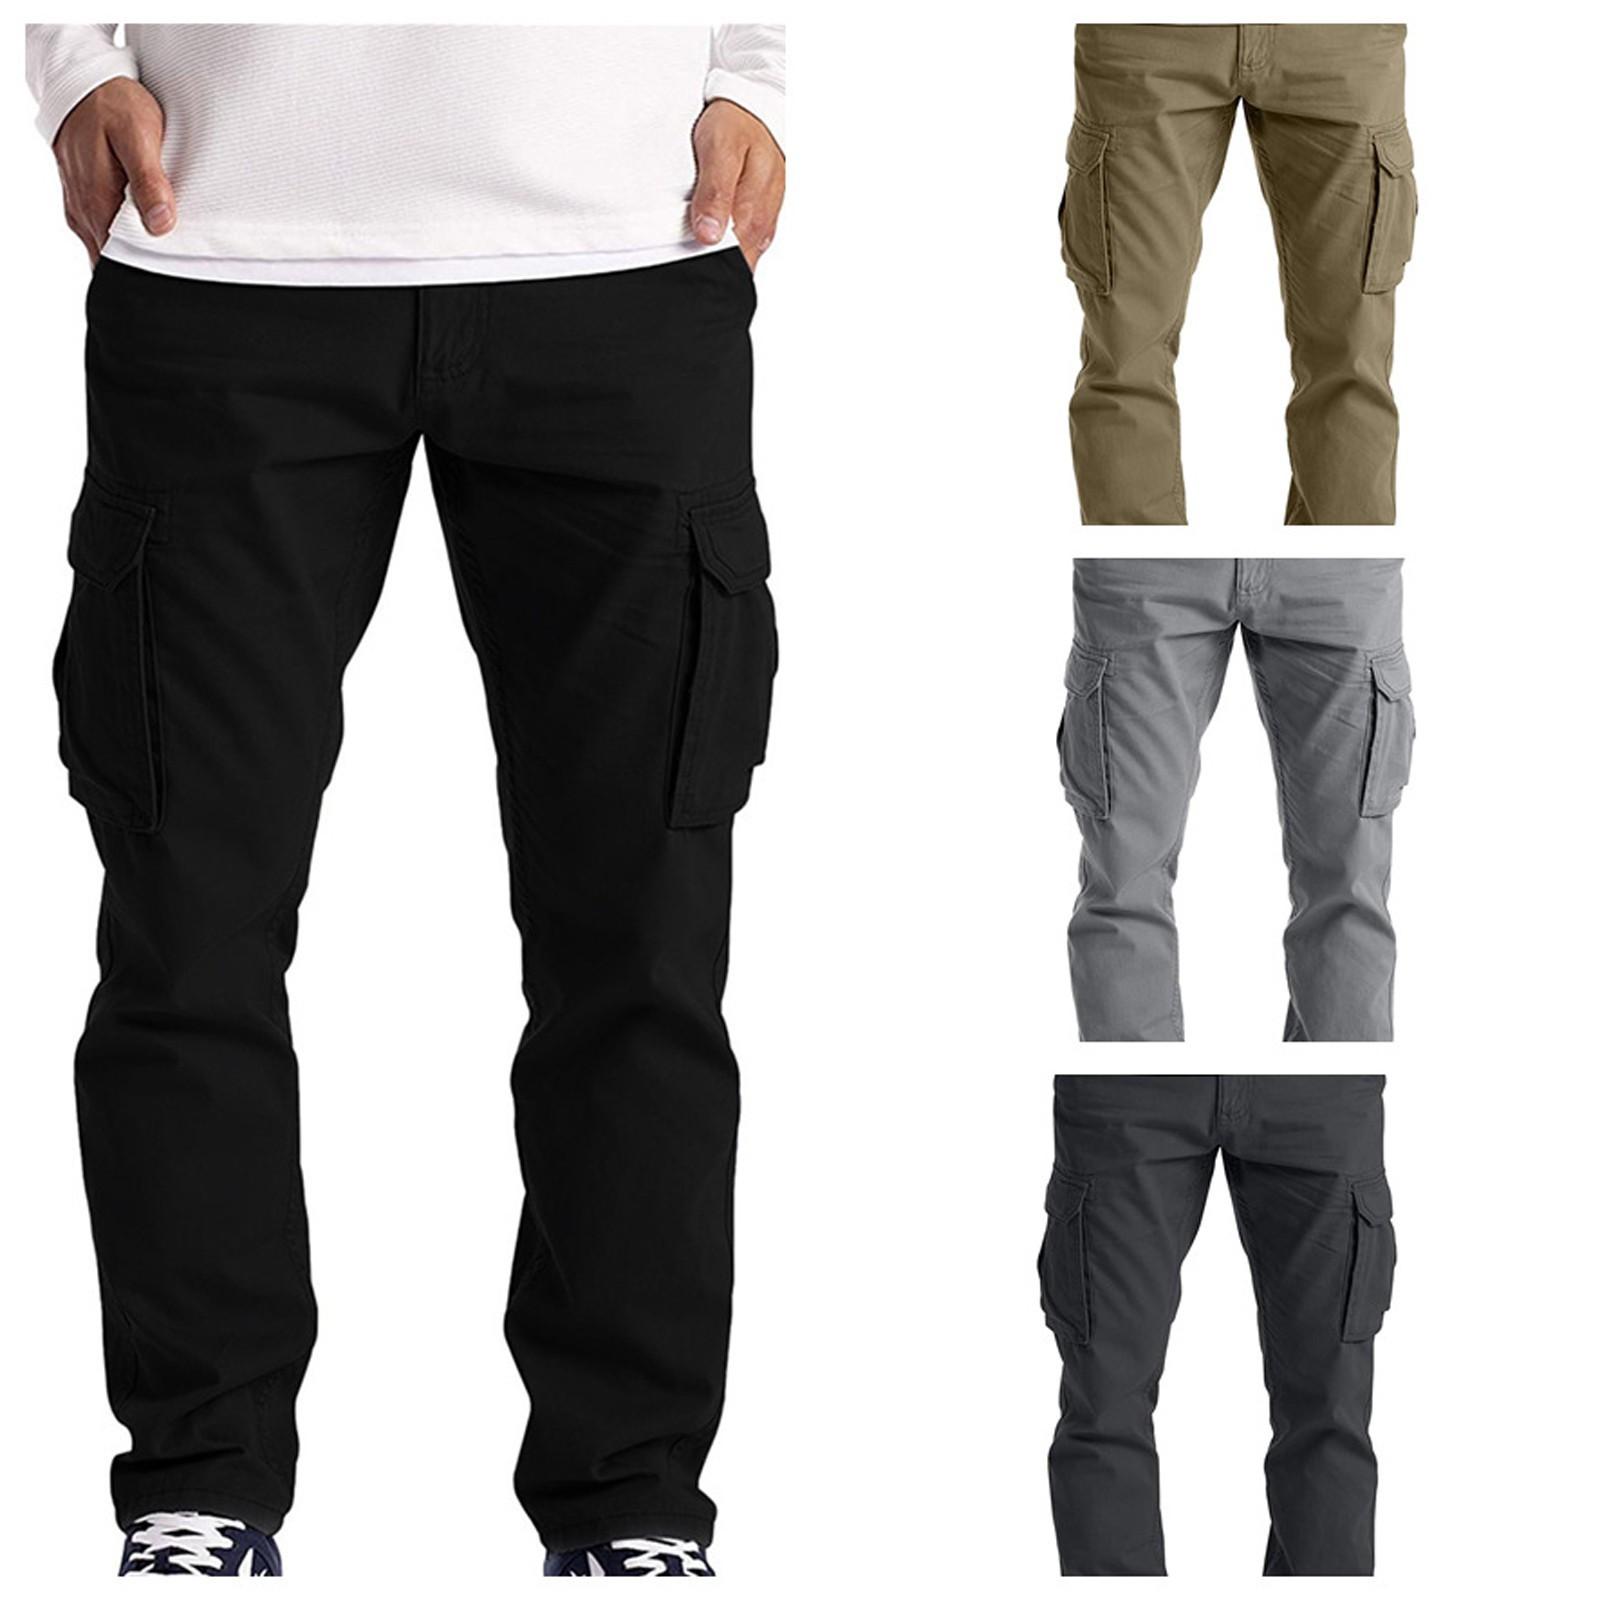 Free birds Men's Sports Casual Jogging Trousers Lightweight Hiking Work Pants Outdoor Pant